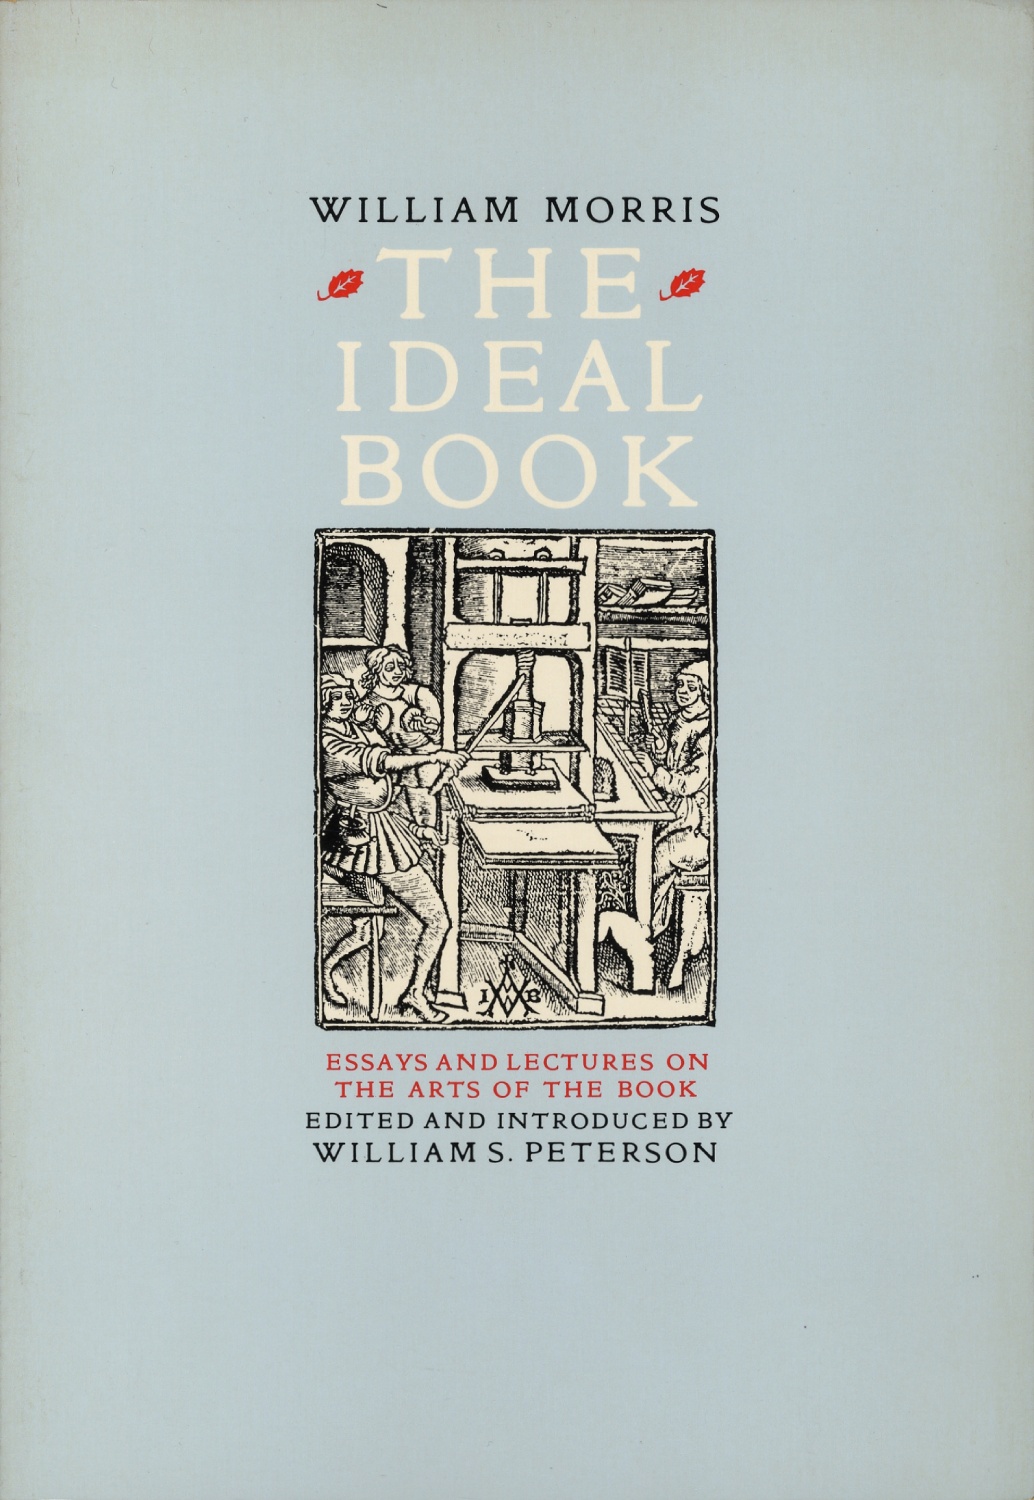 The Ideal Book　Essays and Lectures on the Arts of the Book